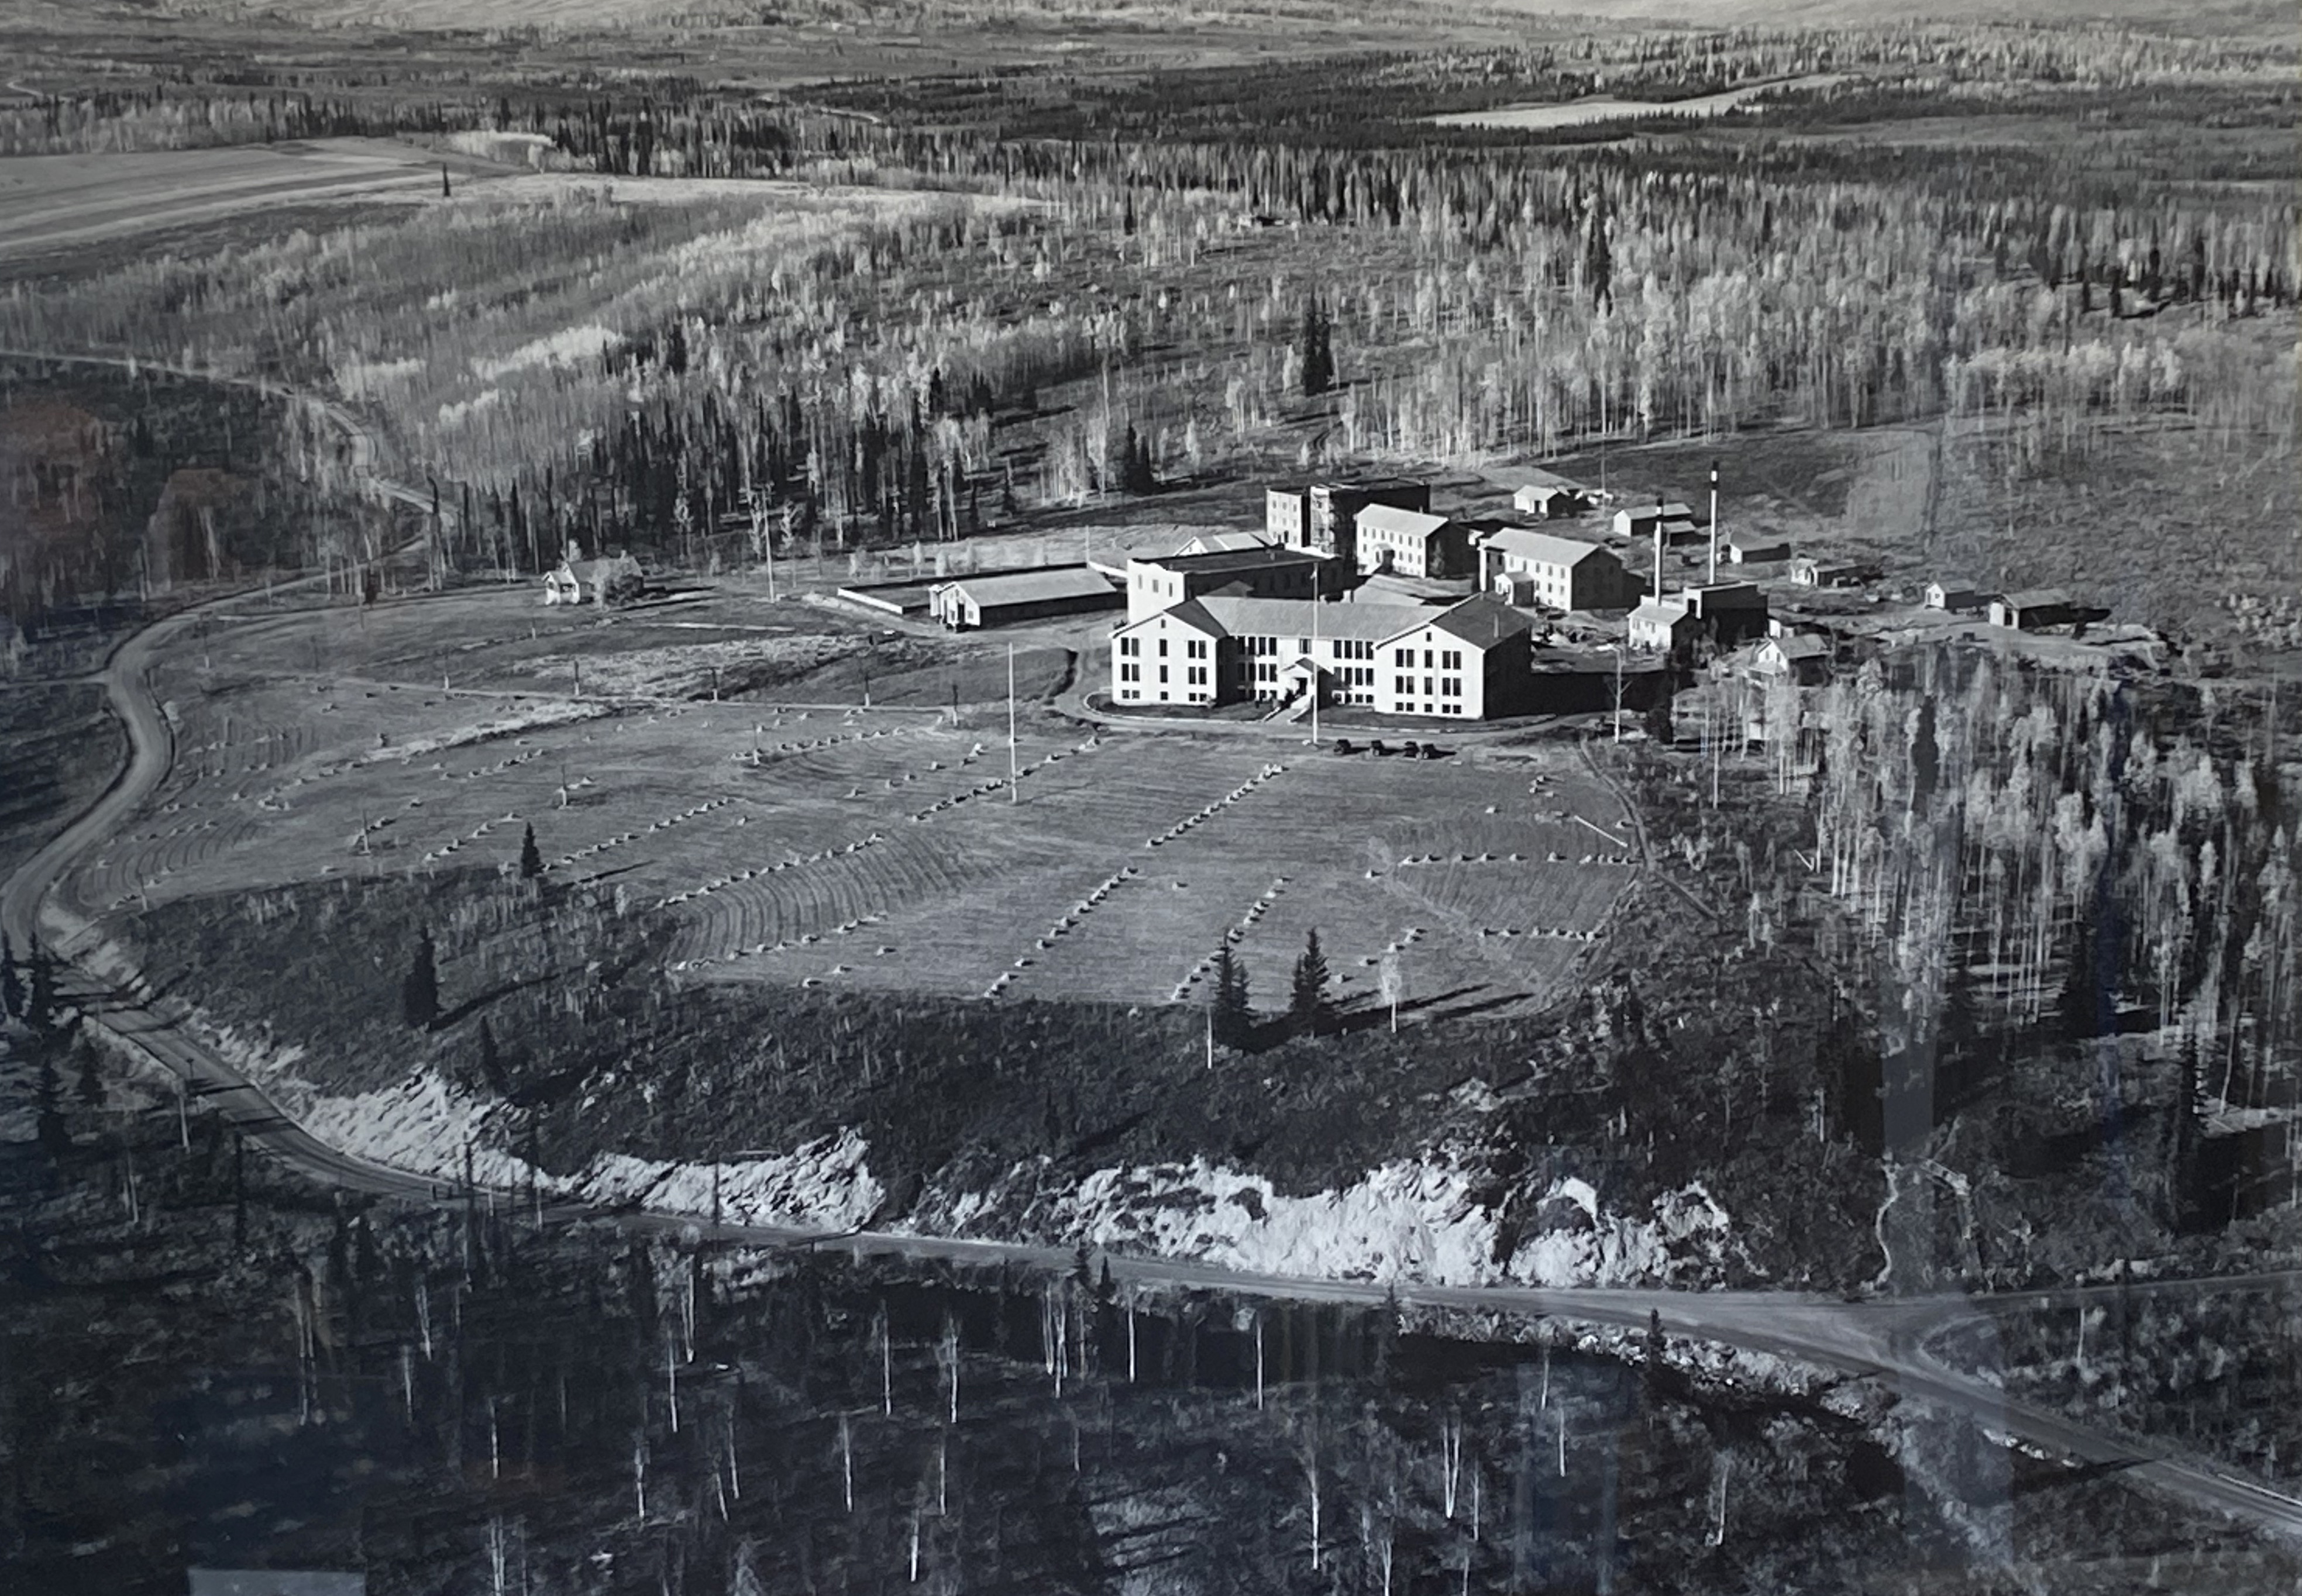 A 1983 black and white photo of the Fairbanks campus